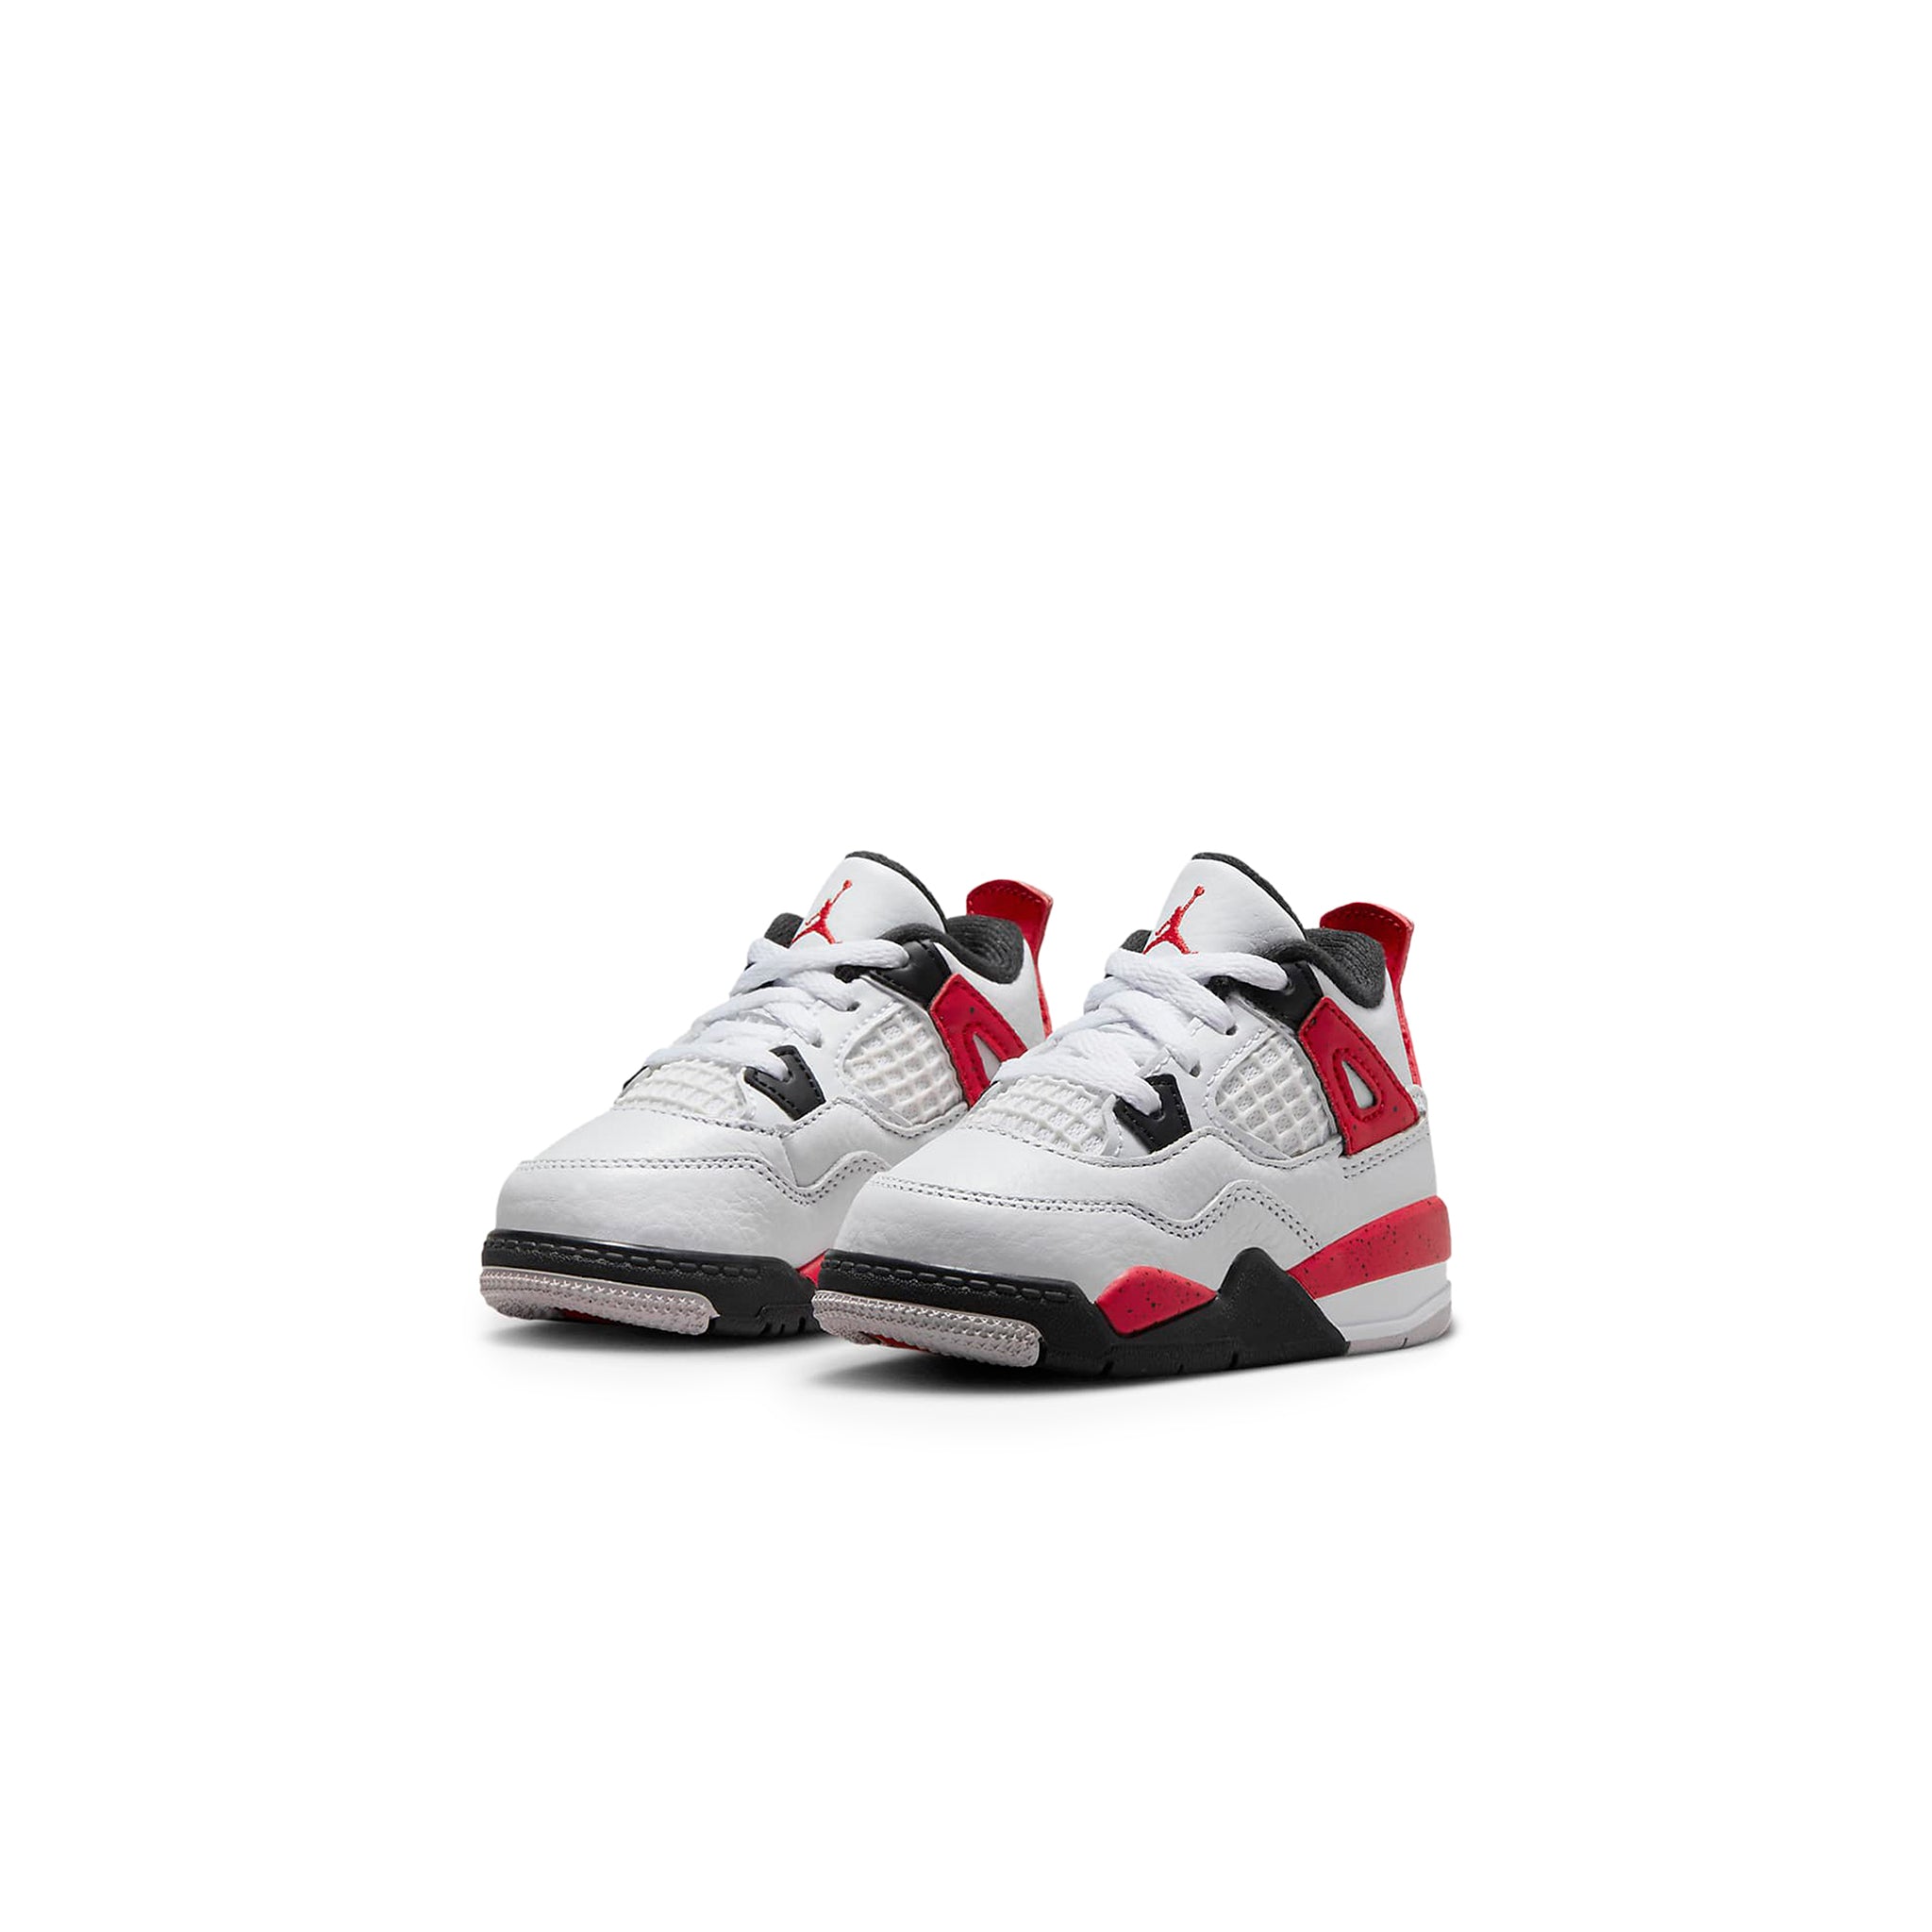 Front side view of Air Jordan 4 Retro Red Cement (2023) (TD) BQ7670-161